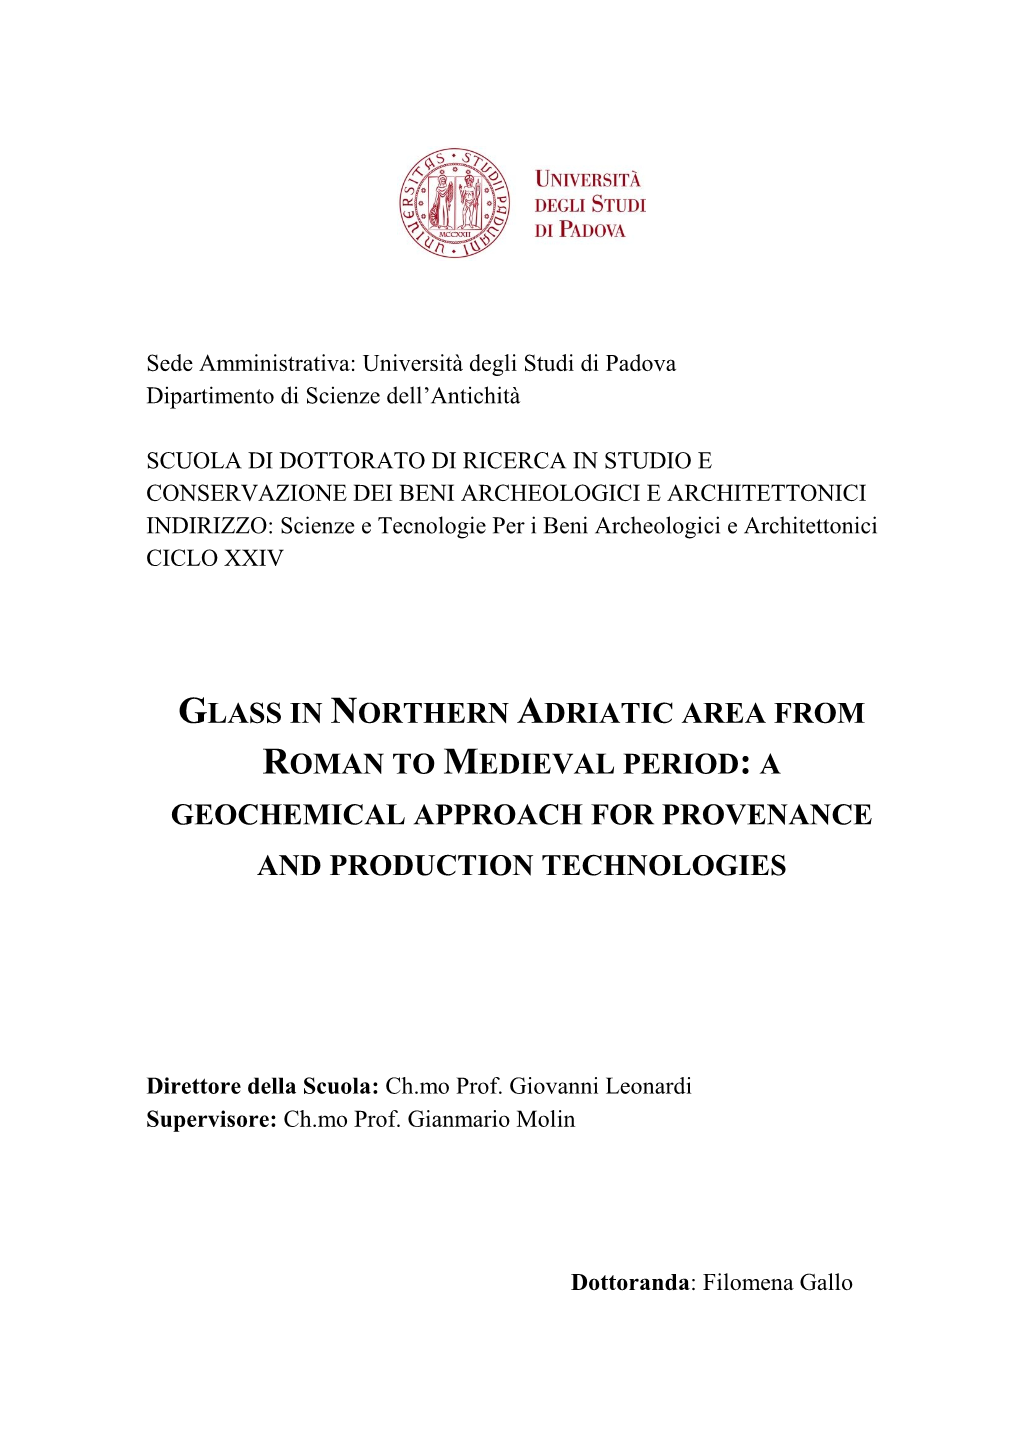 Glass in Northern Adriatic Area from Roman to Medieval Period: a Geochemical Approach for Provenance and Production Technologies